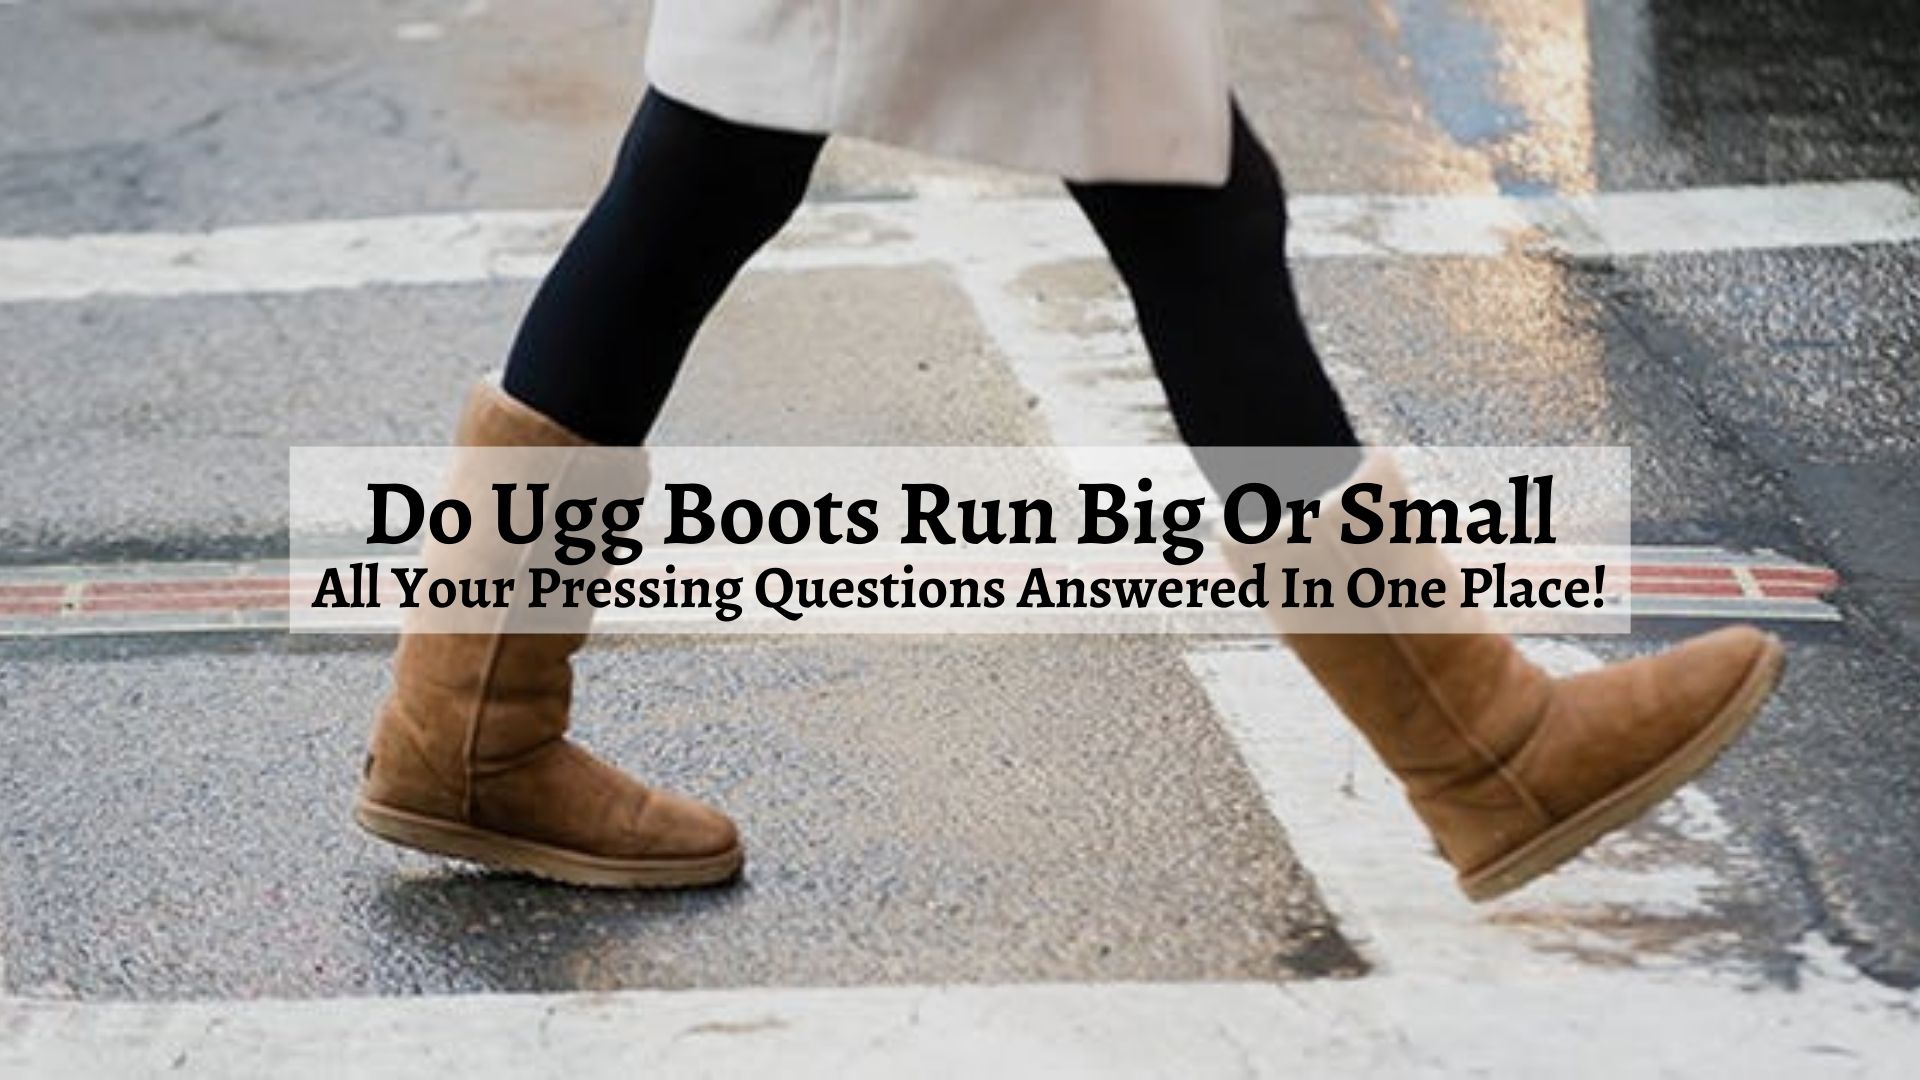 do-ugg-boots-run-big-or-small-all-your-pressing-questions-answered-in-one-place-shoe-filter